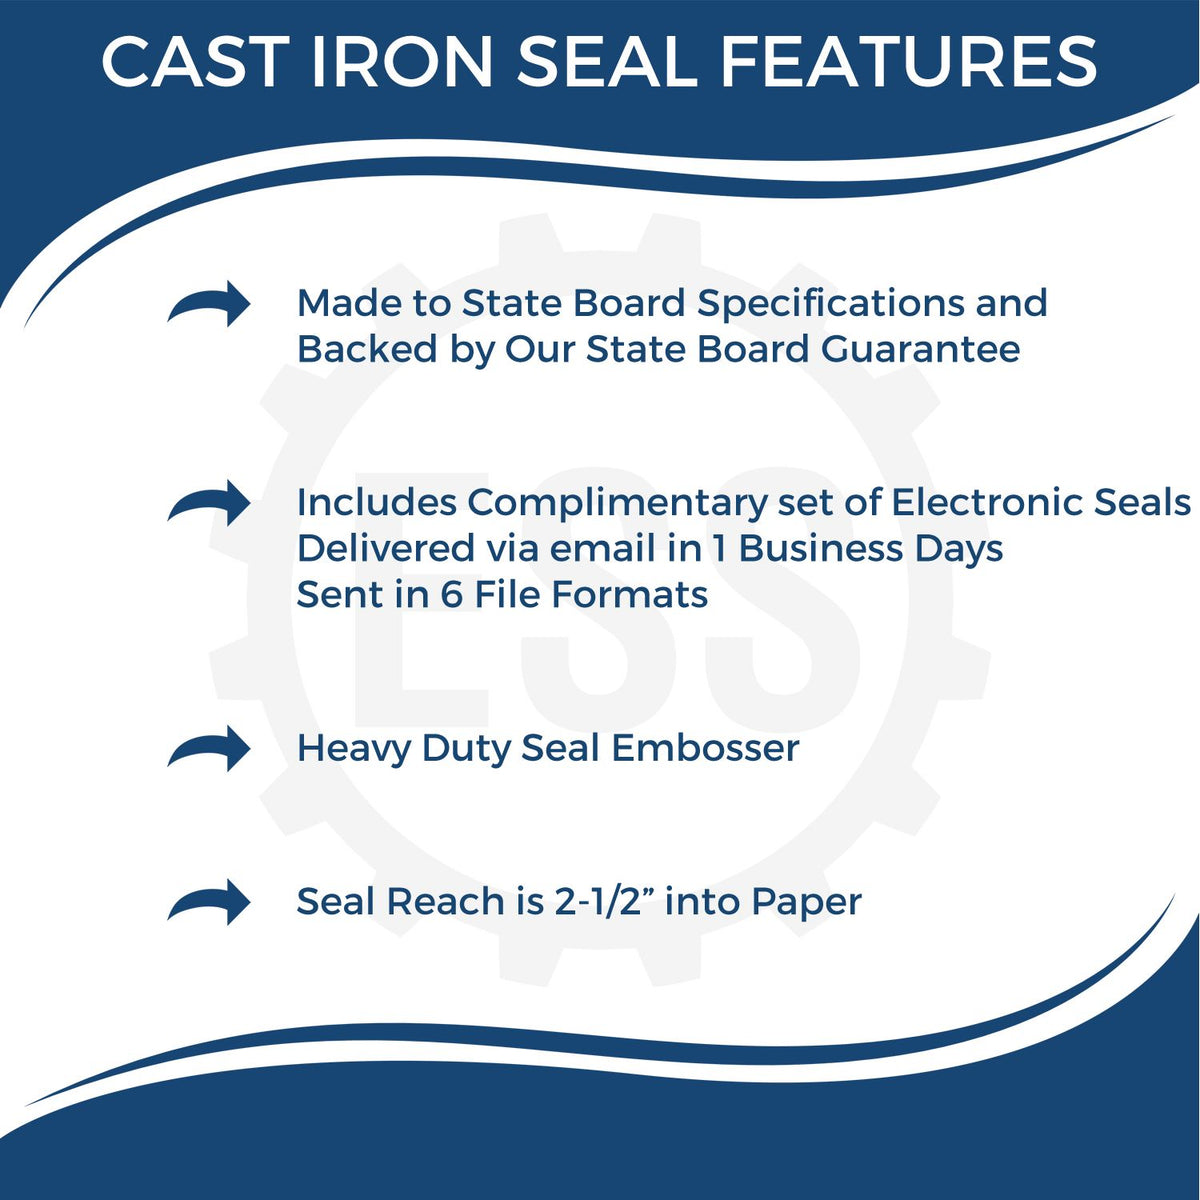 A picture of an infographic highlighting the selling points for the Heavy Duty Cast Iron Arizona Architect Embosser